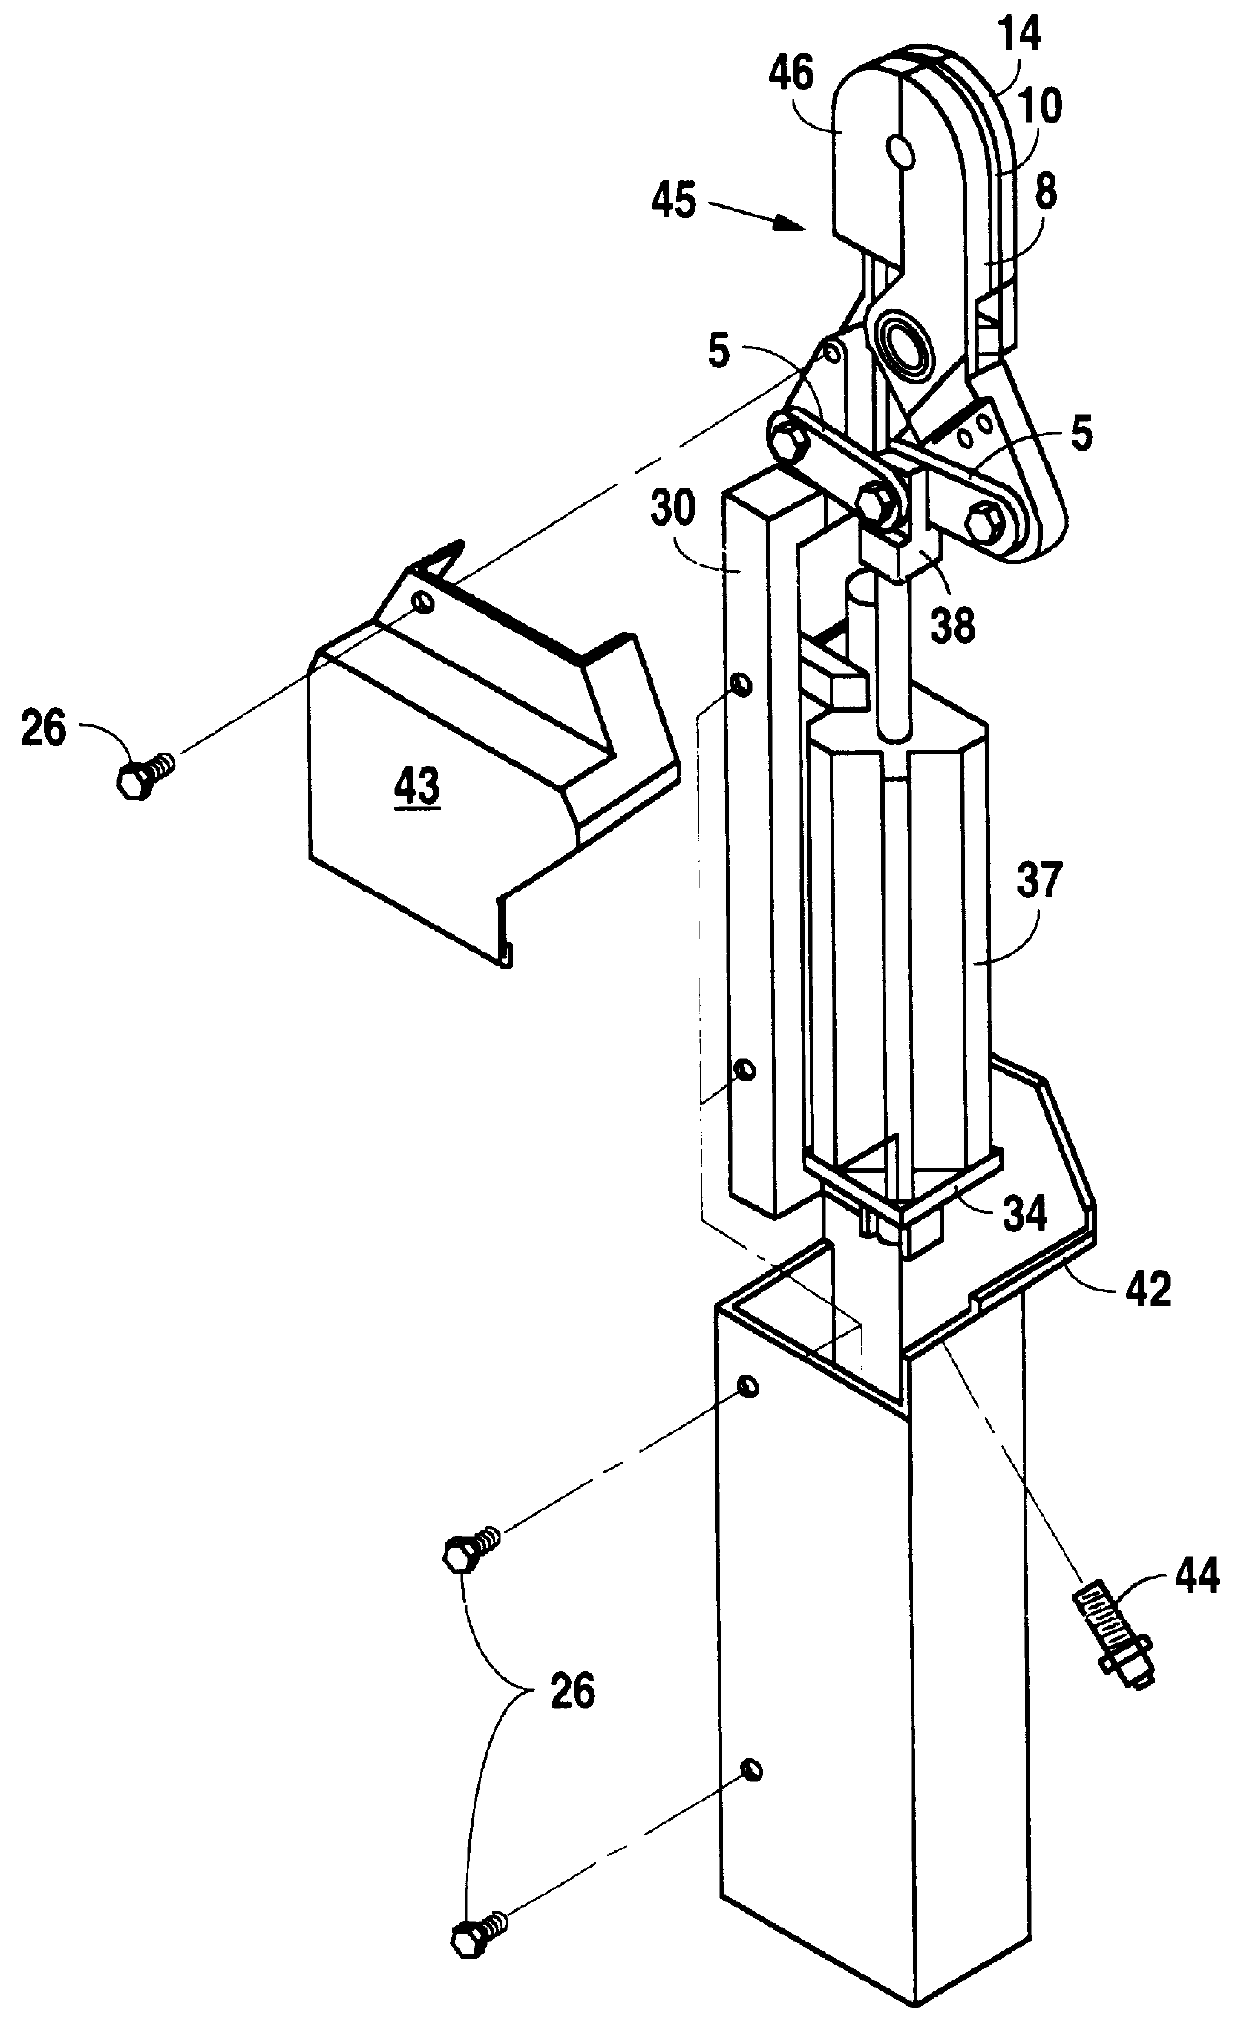 Apparatus and method for precisely aligning and welding two pieces of weldable material